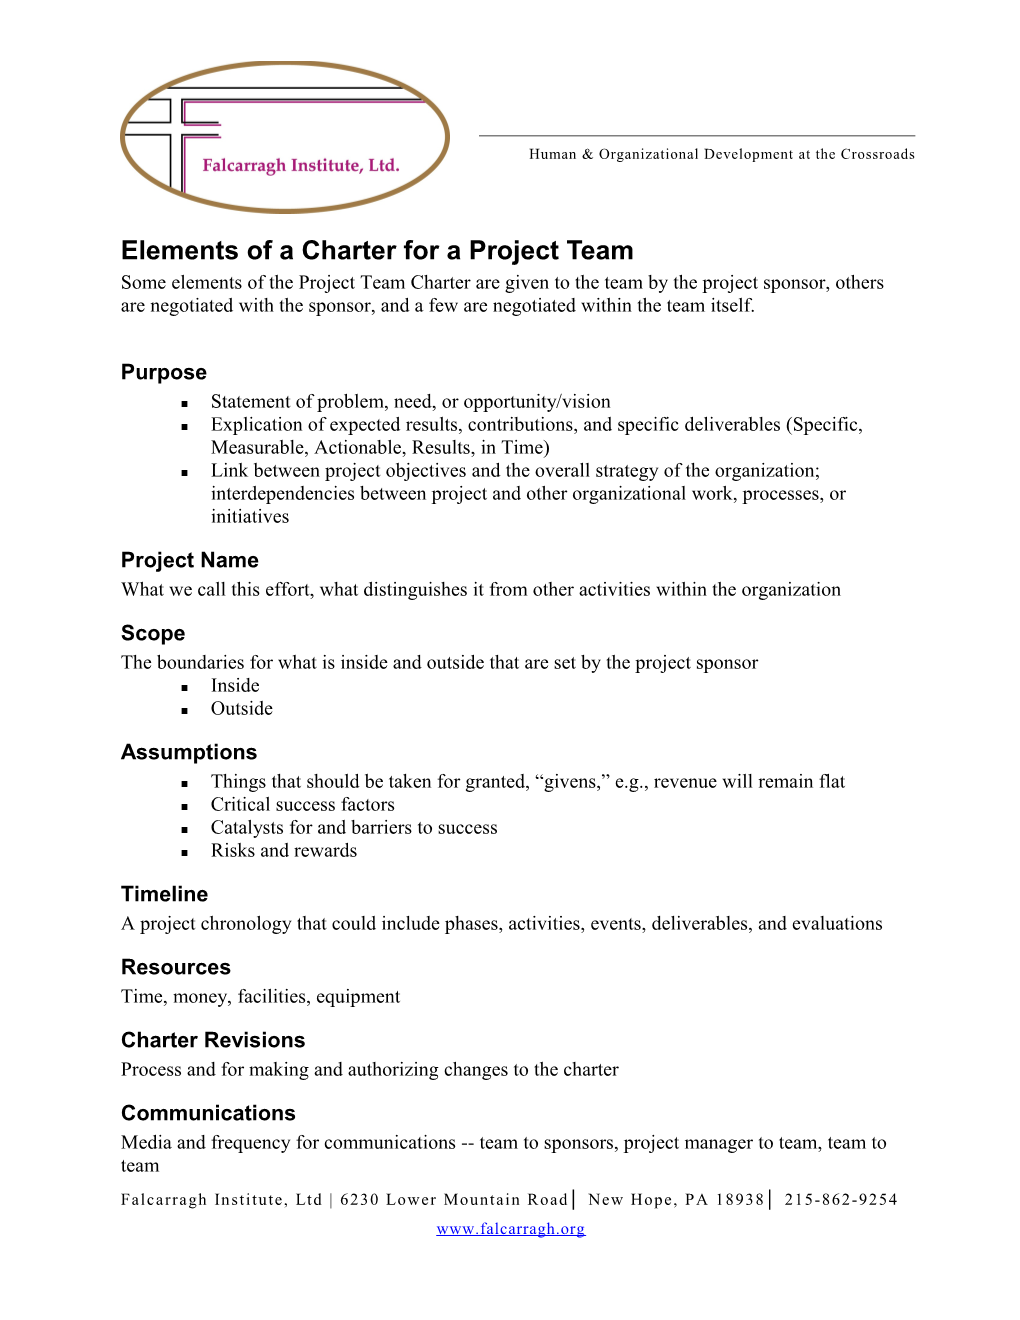 Elements of a Charter for a Project Team